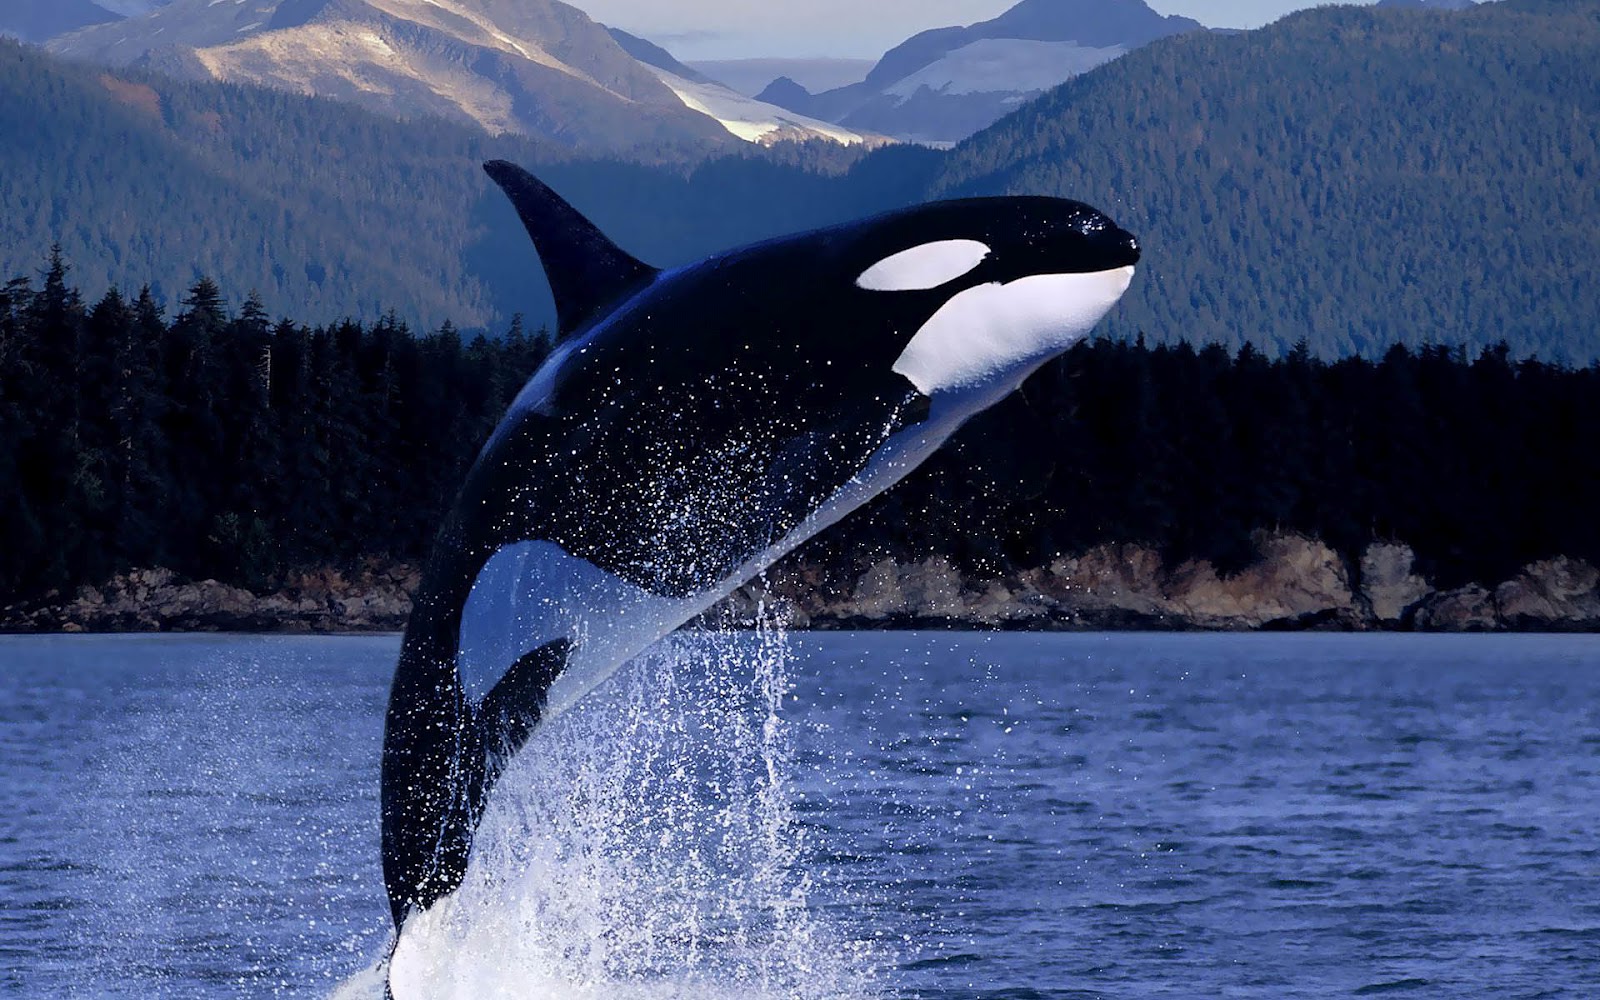 http://1.bp.blogspot.com/-ztFOblixj-U/UDe4KvjVmmI/AAAAAAAAA_w/2AxDS7HBNxo/s1600/hd-orca-killer-whale-wallpaper-with-a-orca-killer-whale-jumping-out-of-the-water-hd-orca-wallpapers-backgrounds-pictures-photos.jpg